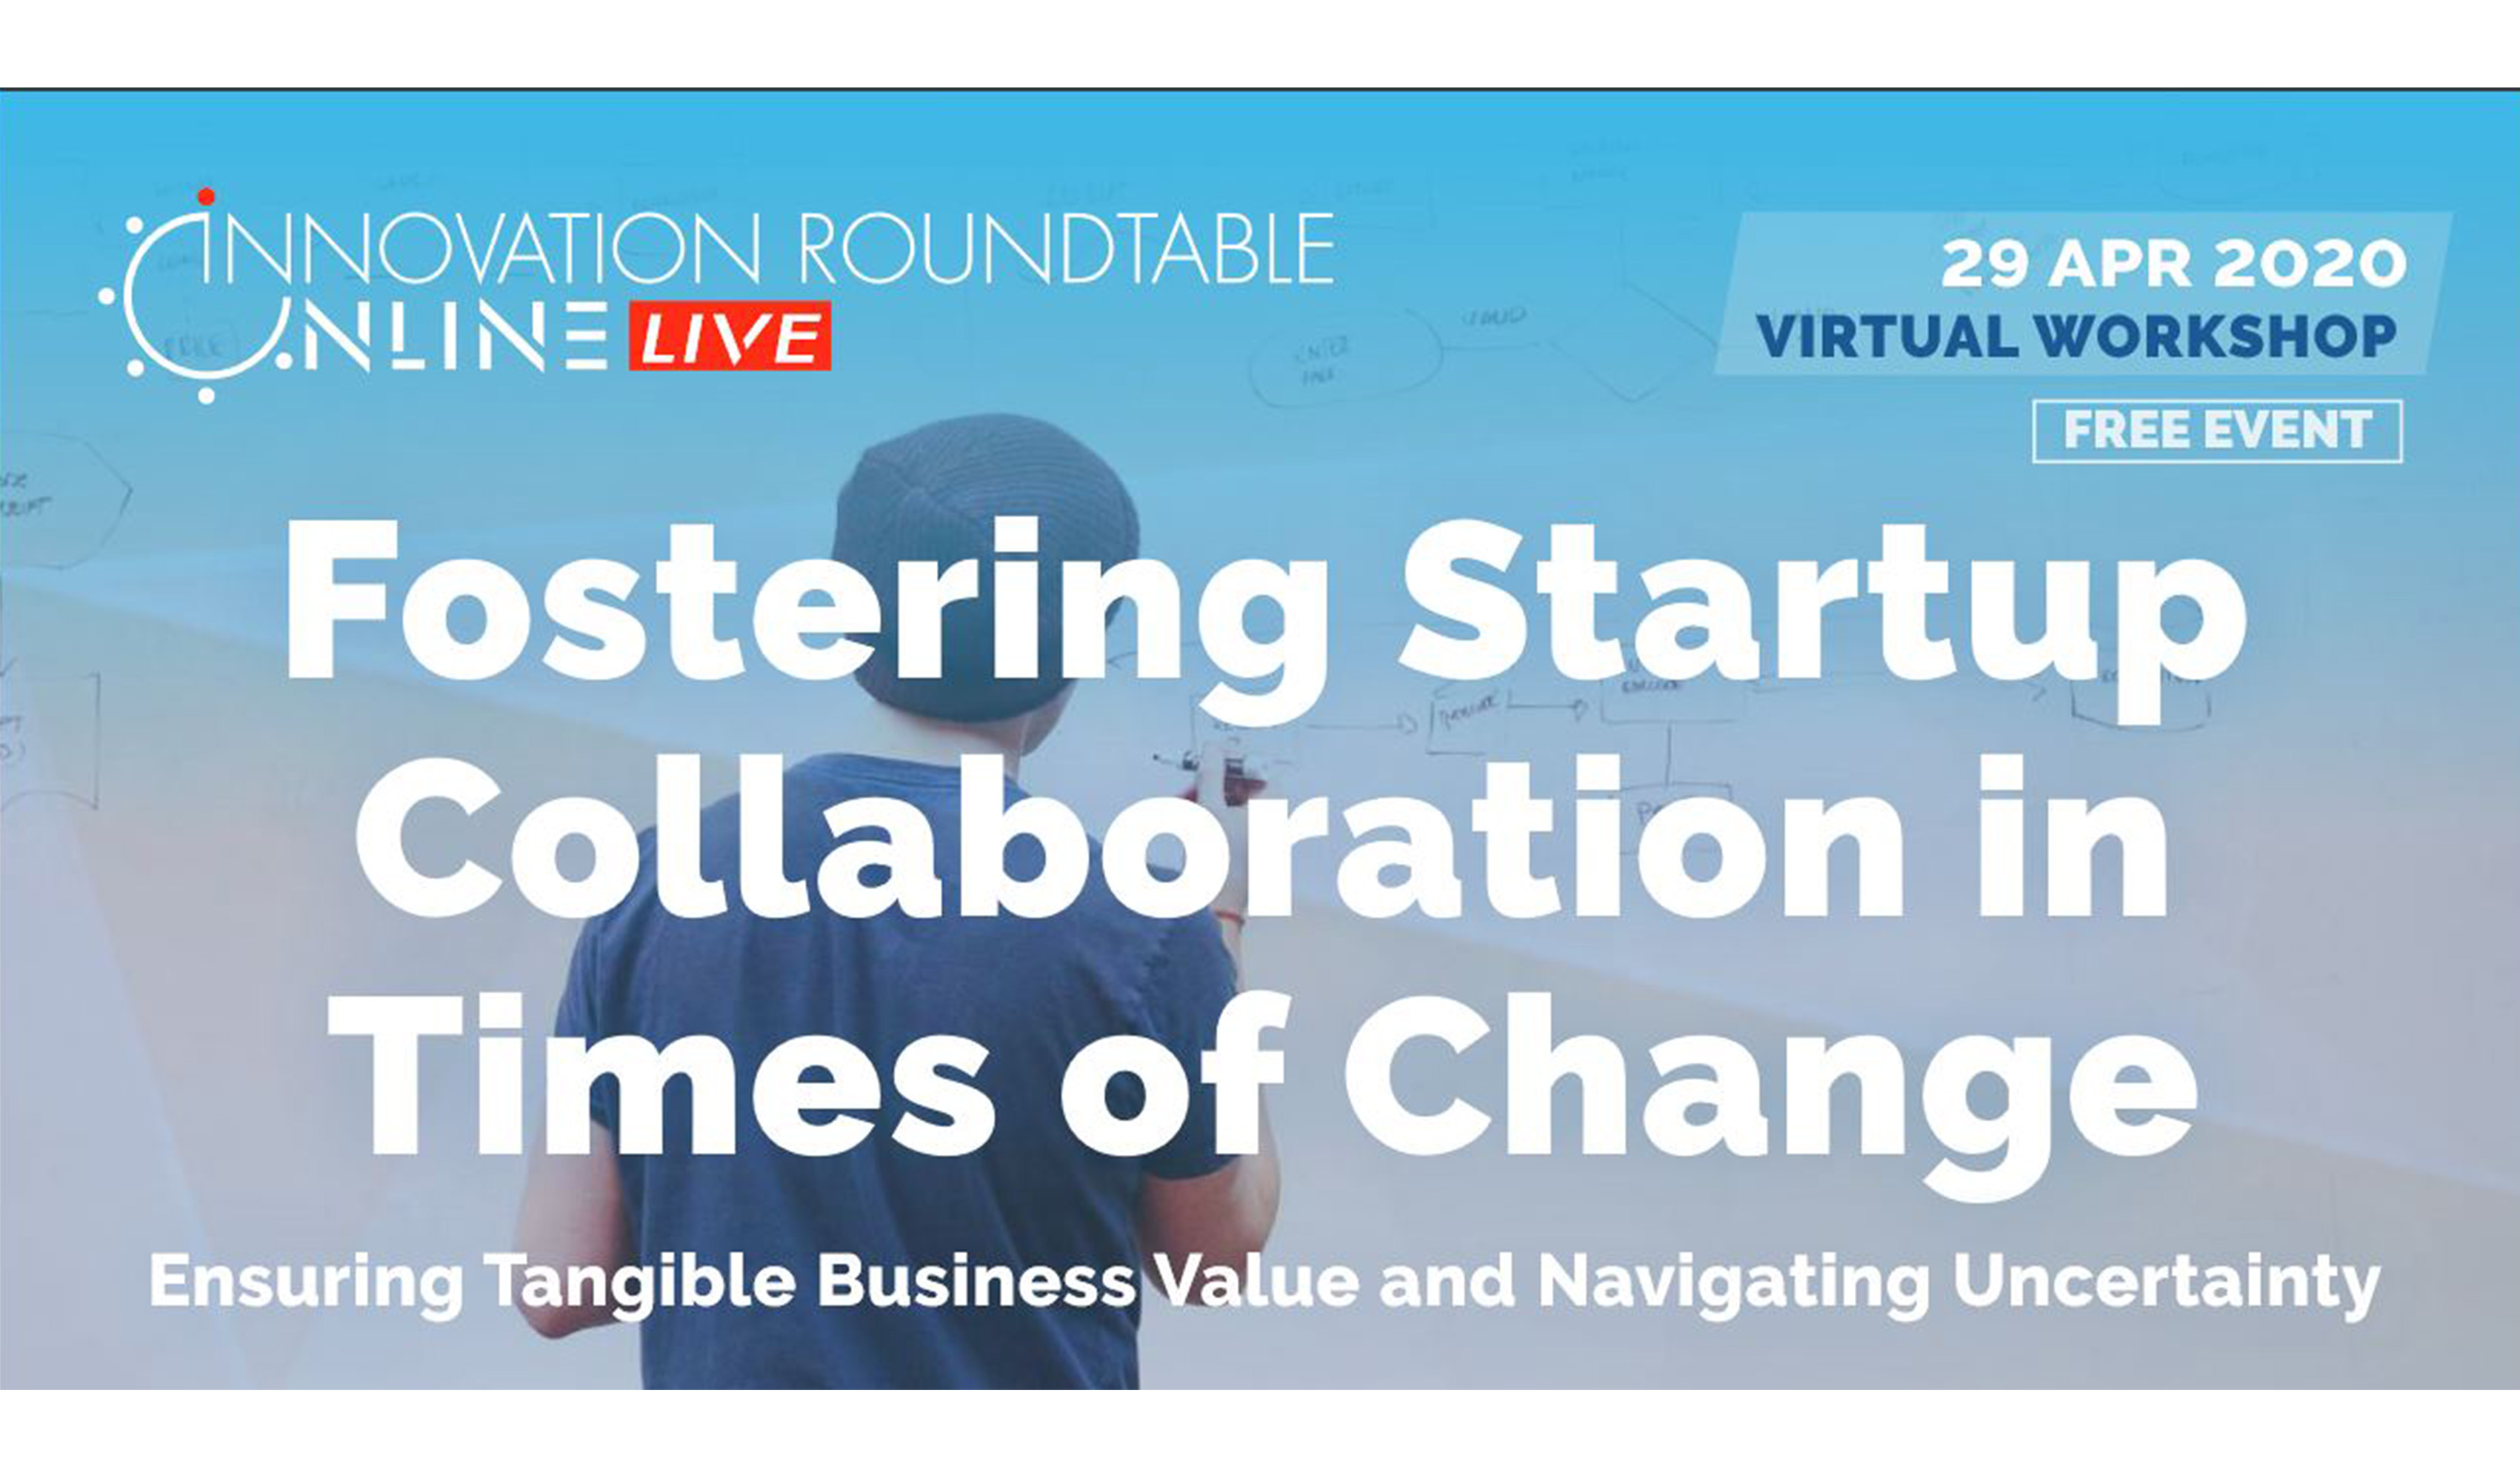 Innovation Roundtable - On line : 'Fostering Startup Collaboration in Times of Change'